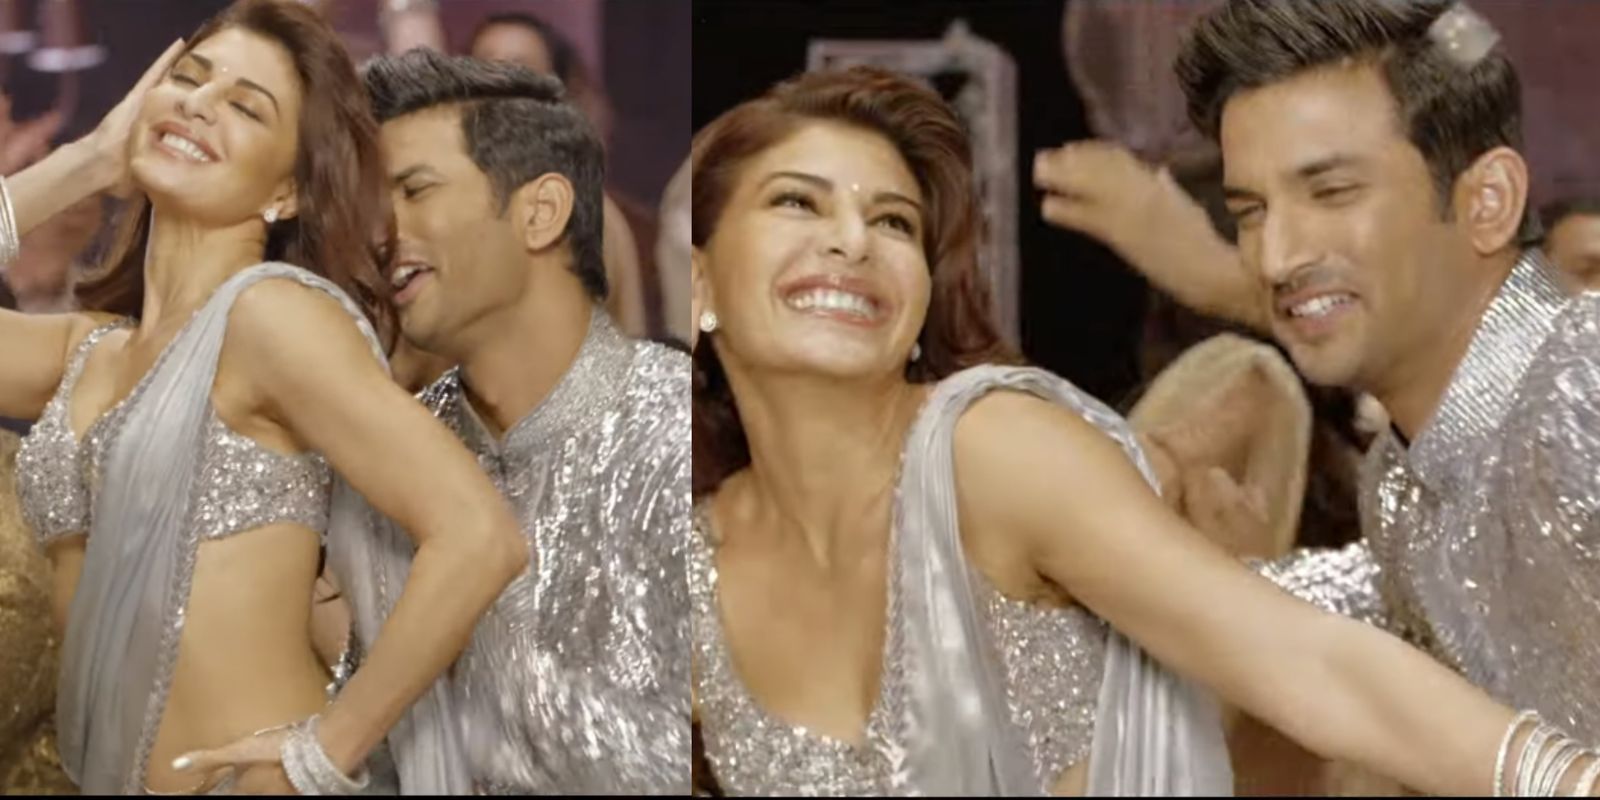 Drive Song Prem Pujari: Jacqueline Fernandez And Sushant Singh Rajput Add Glitz To This Wedding Party Number